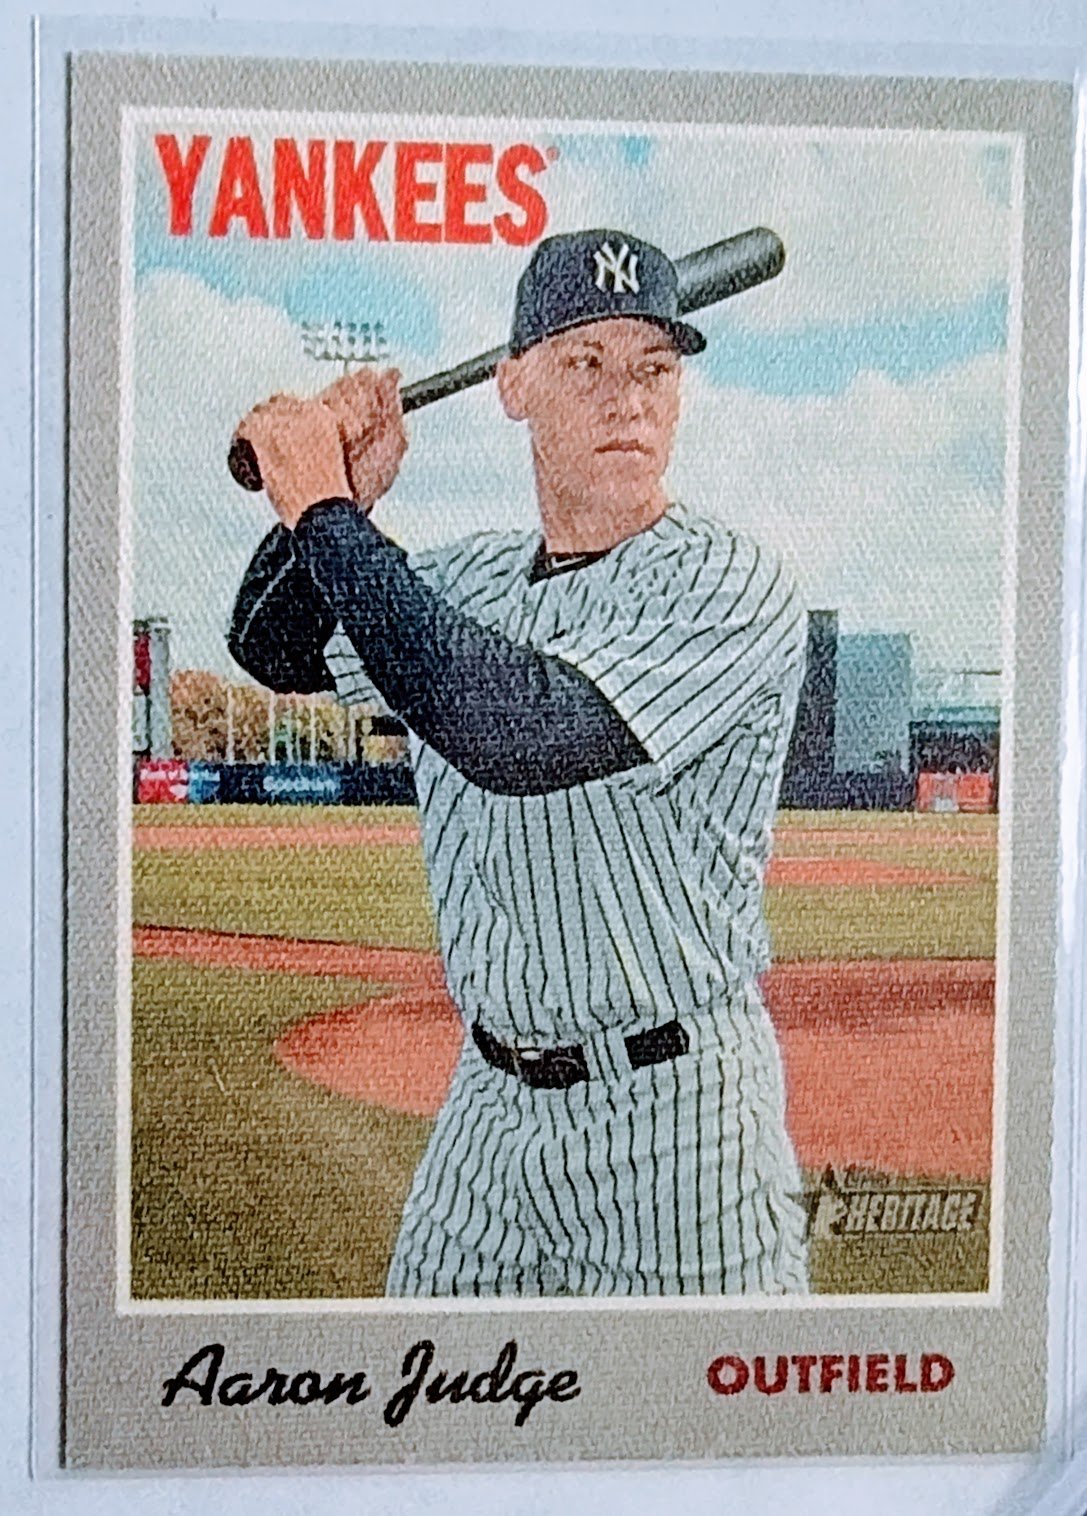 2018 Topps Heritage Aaron Judge Cloth Sticker Insert Baseball Card TPTV simple Xclusive Collectibles   